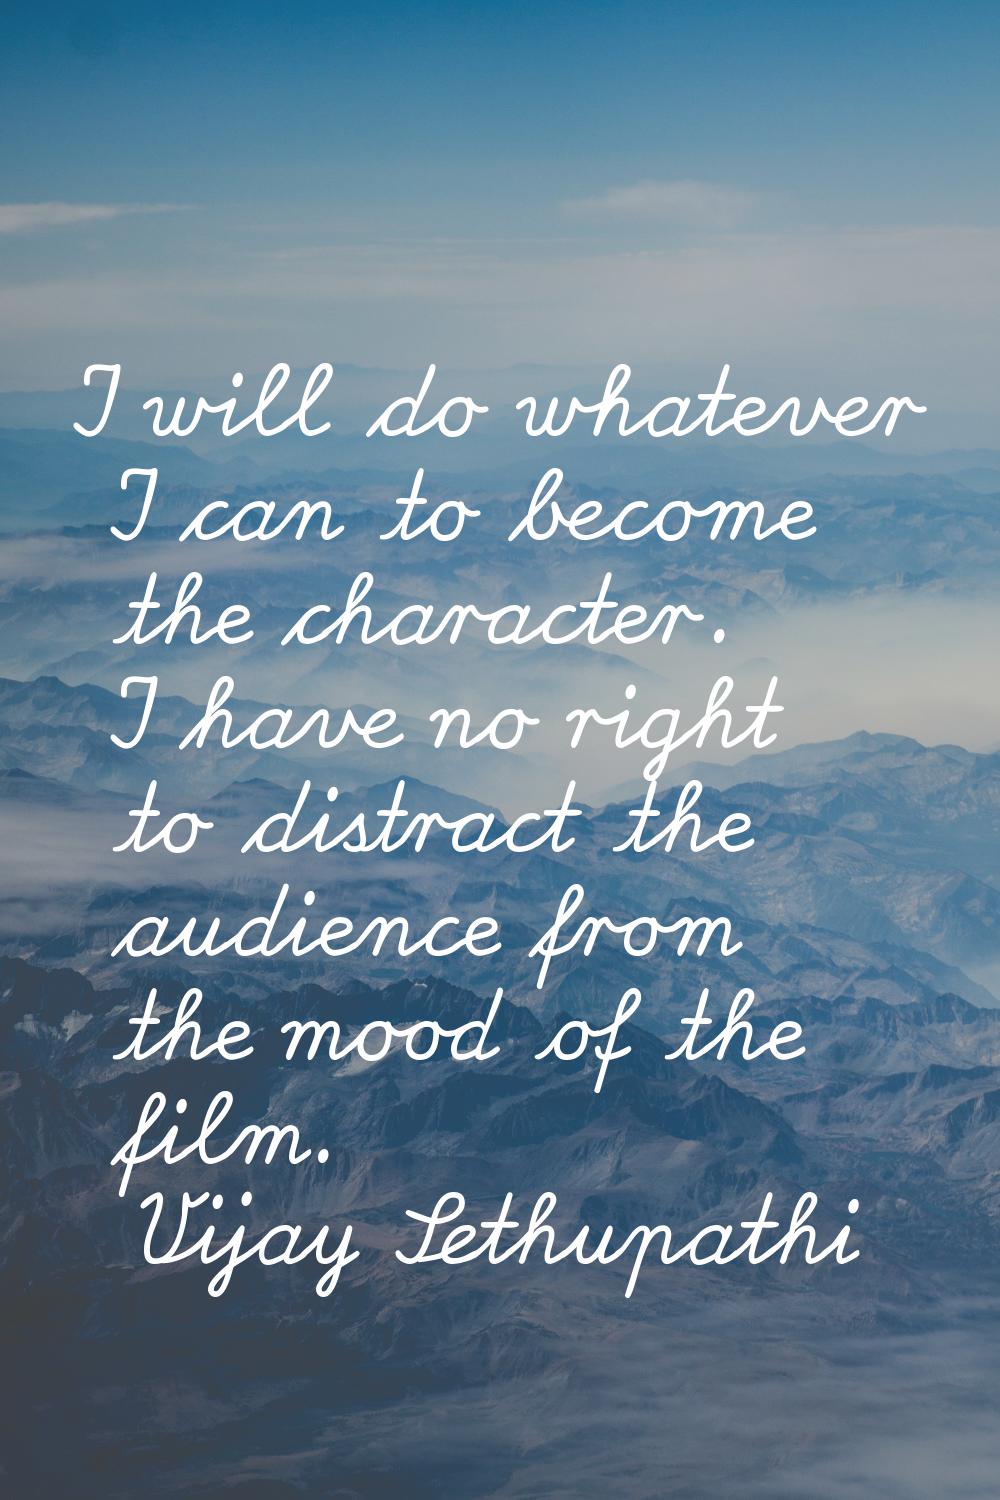 I will do whatever I can to become the character. I have no right to distract the audience from the